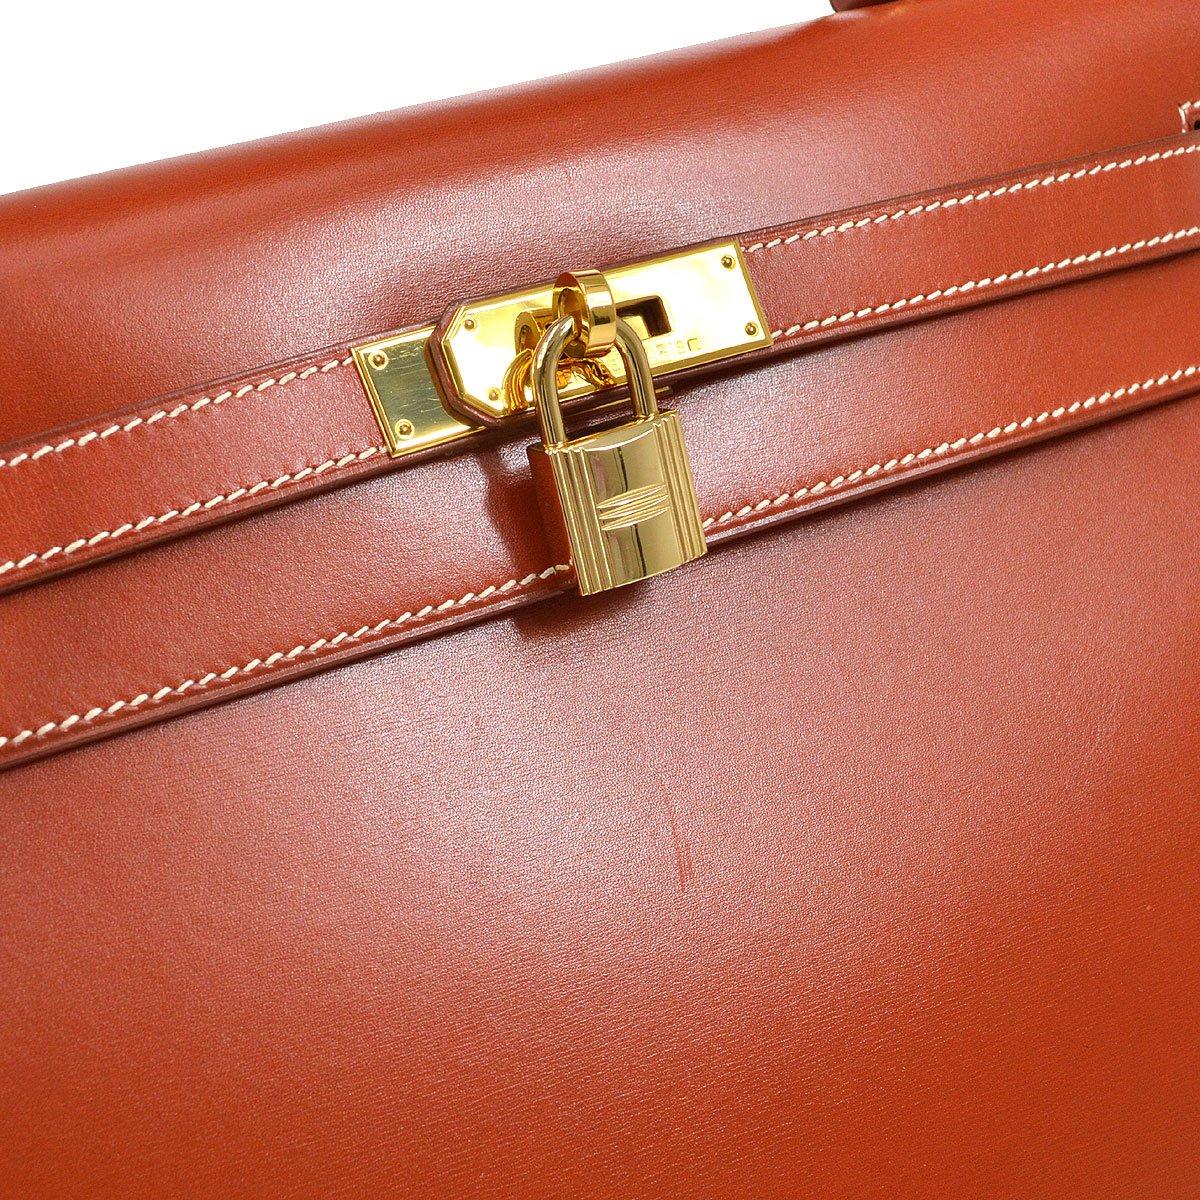 Pre-Owned Vintage Condition
From 2002 Collection
Box Calfskin Leather
Gold Tone Hardware
Measures 13